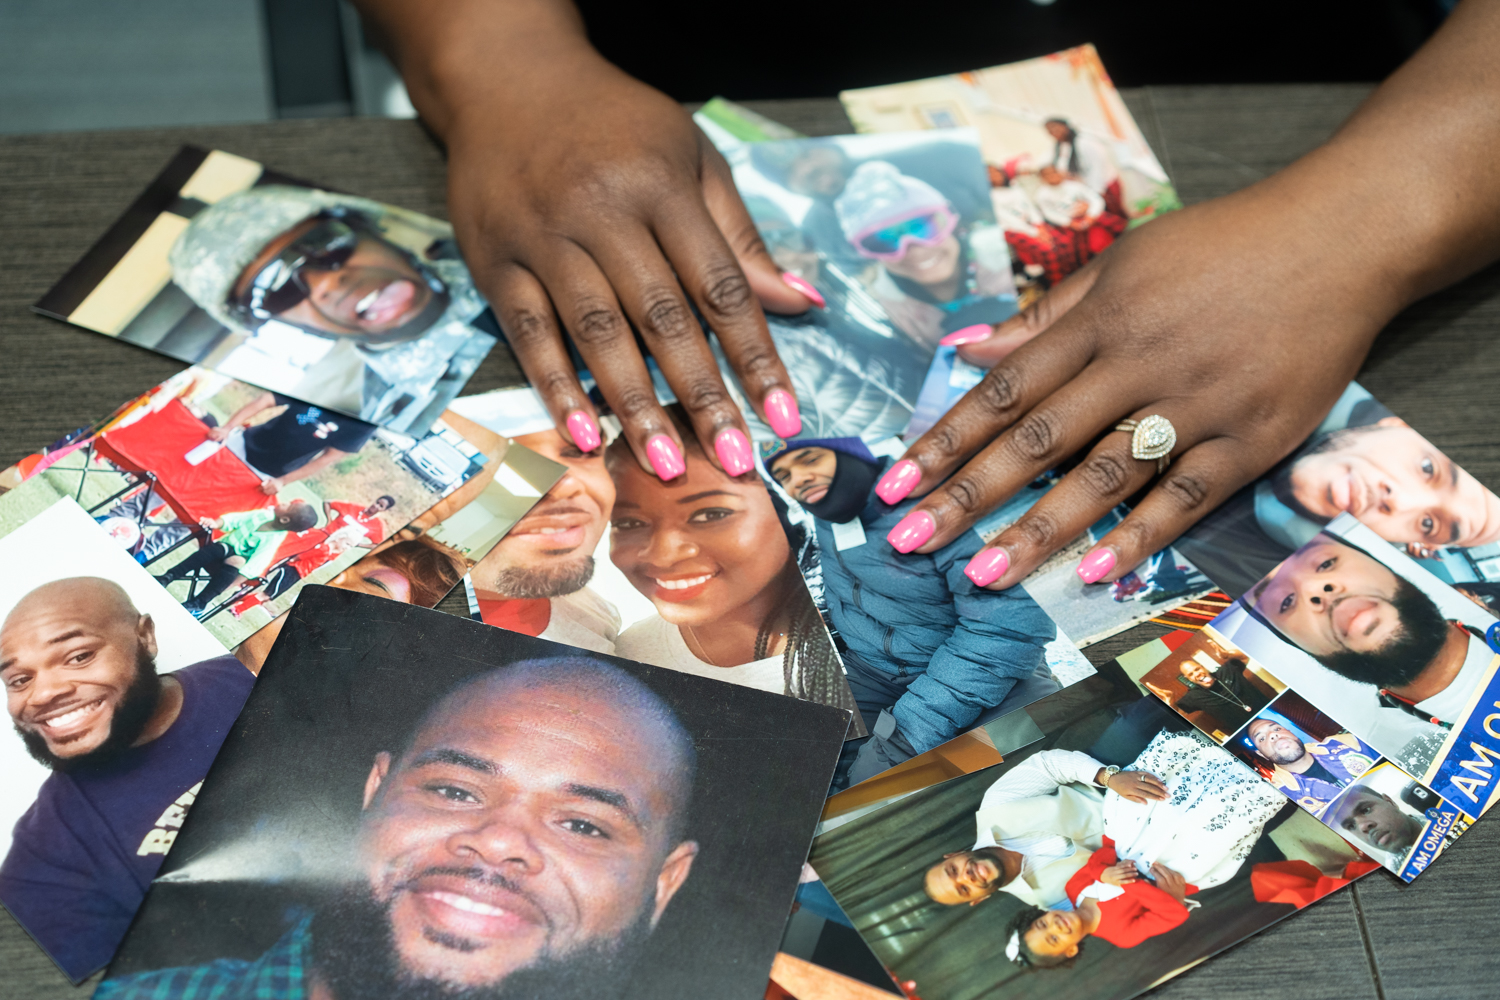 COVID families: Black woman's hands wearing a wedding ring lsort through several color photos overlapping laying on a table.